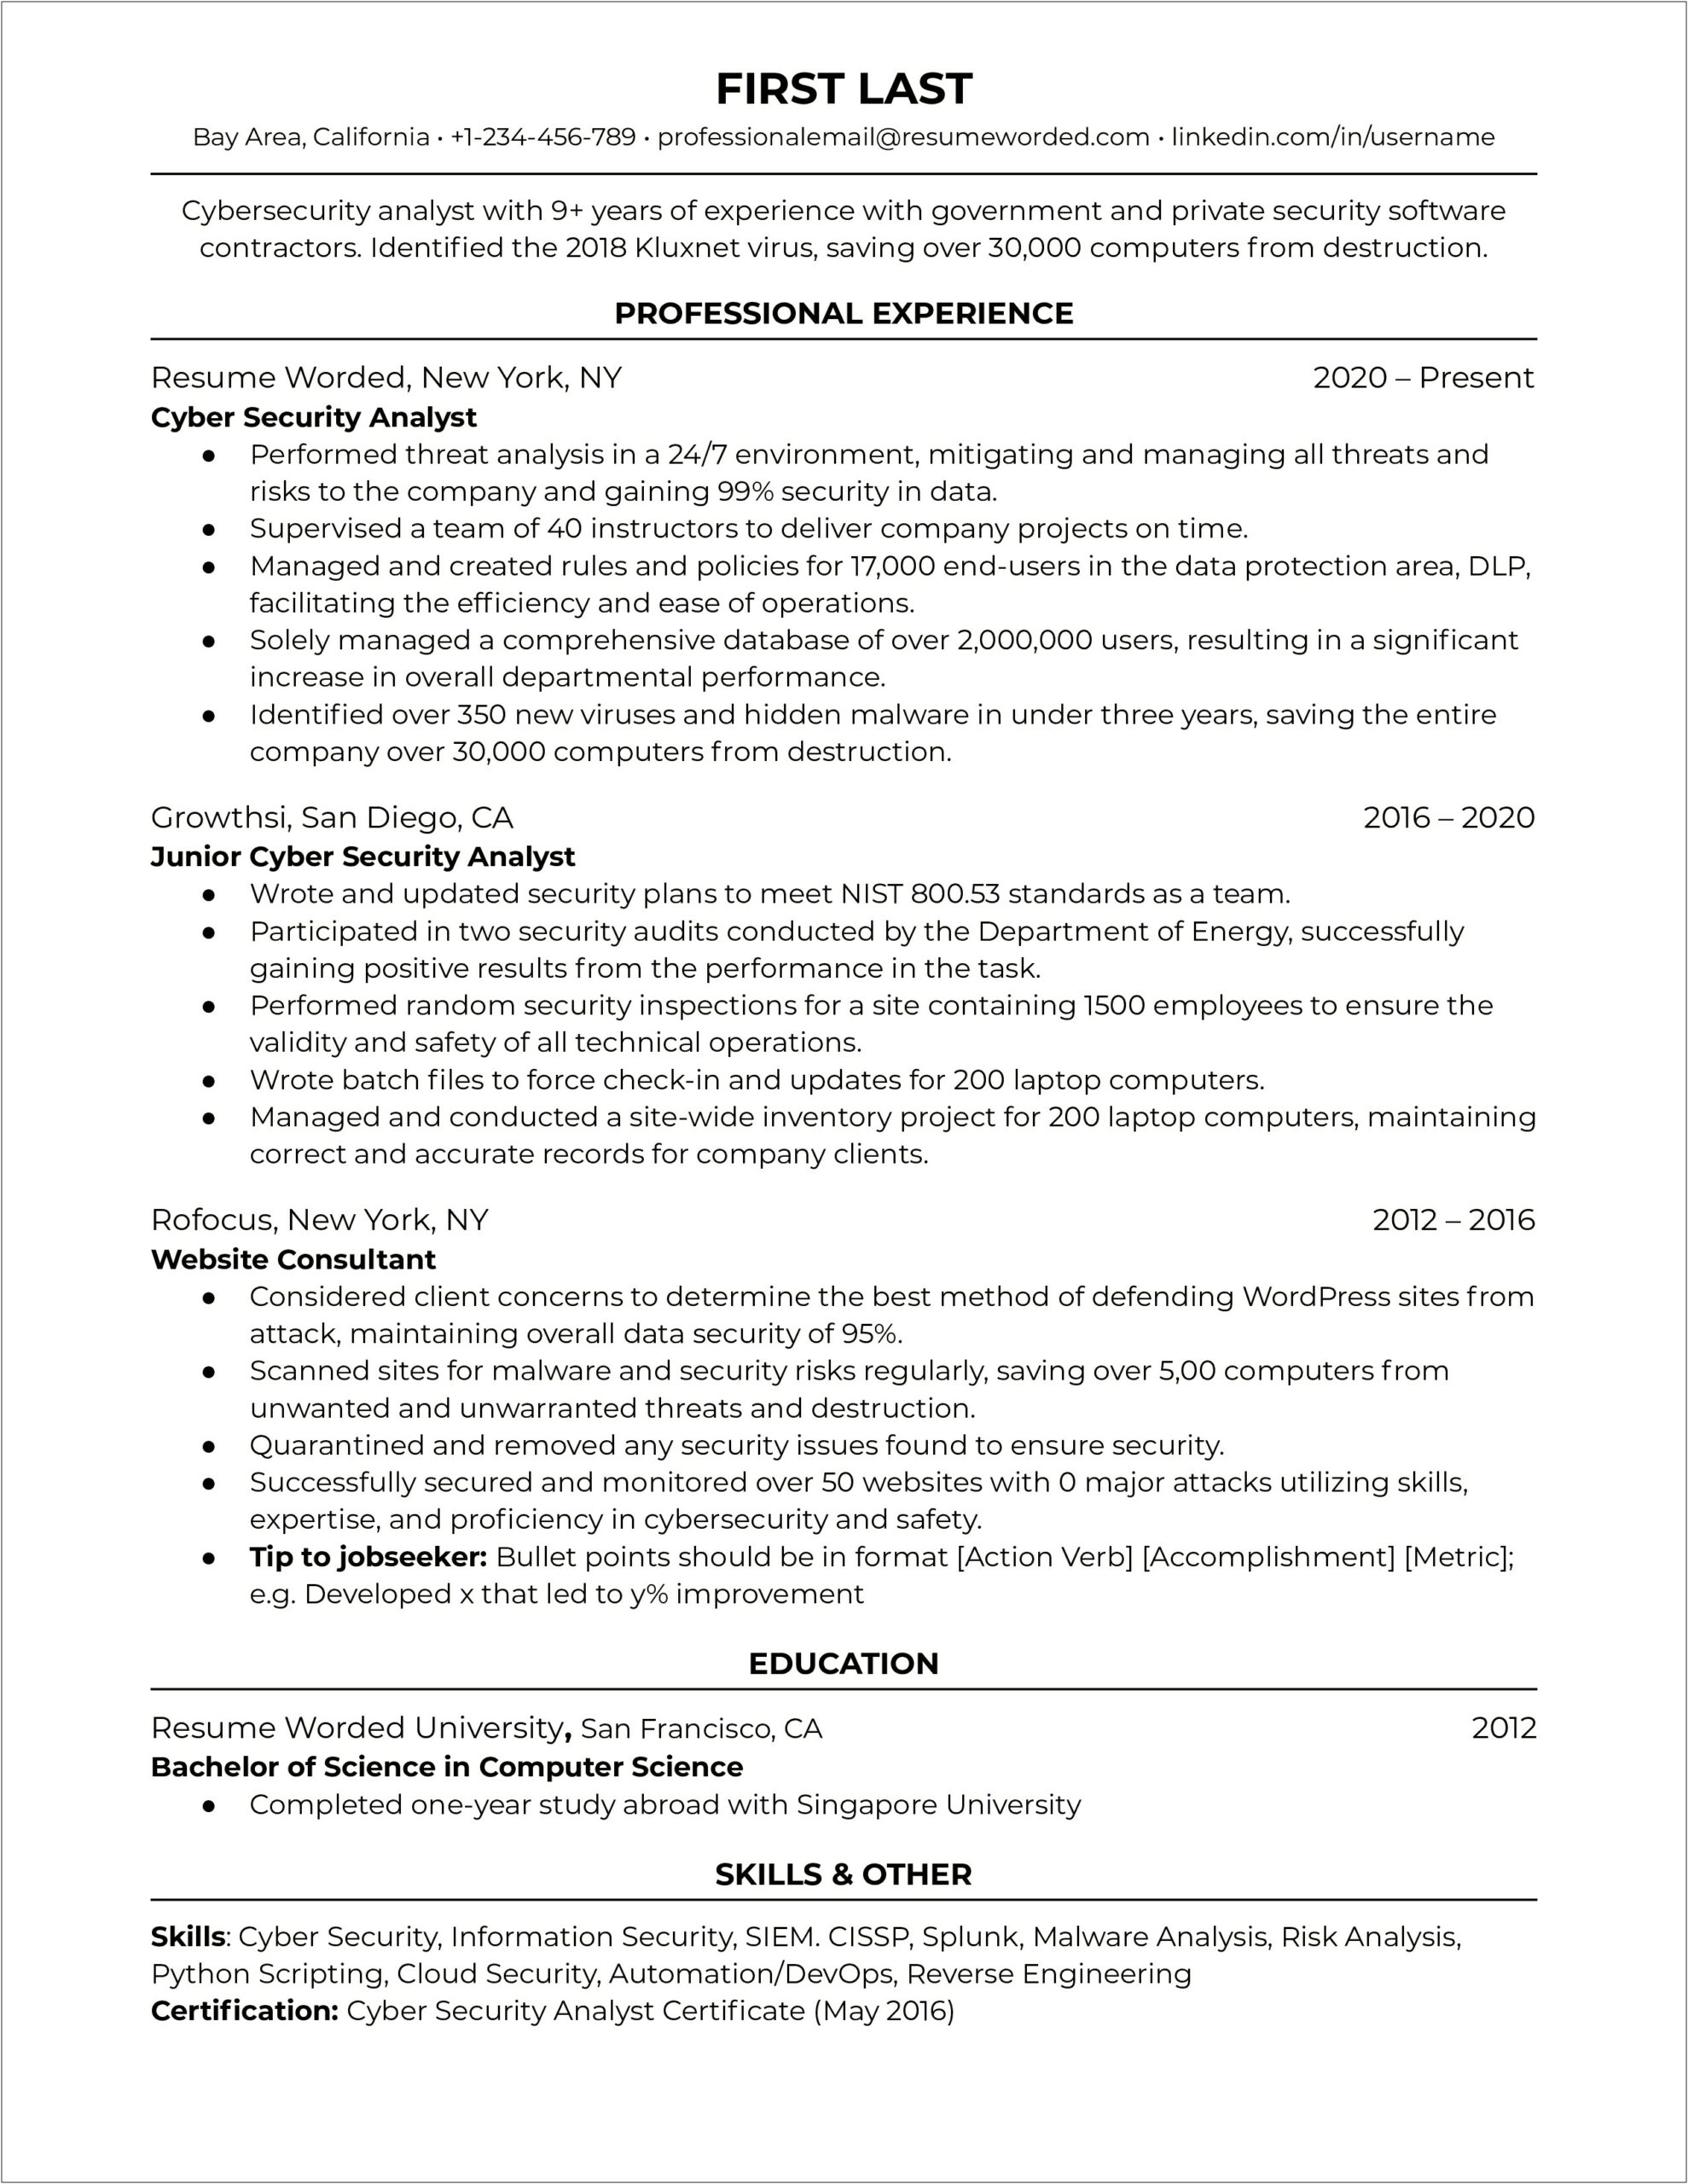 Career Highlights On Resume Examples